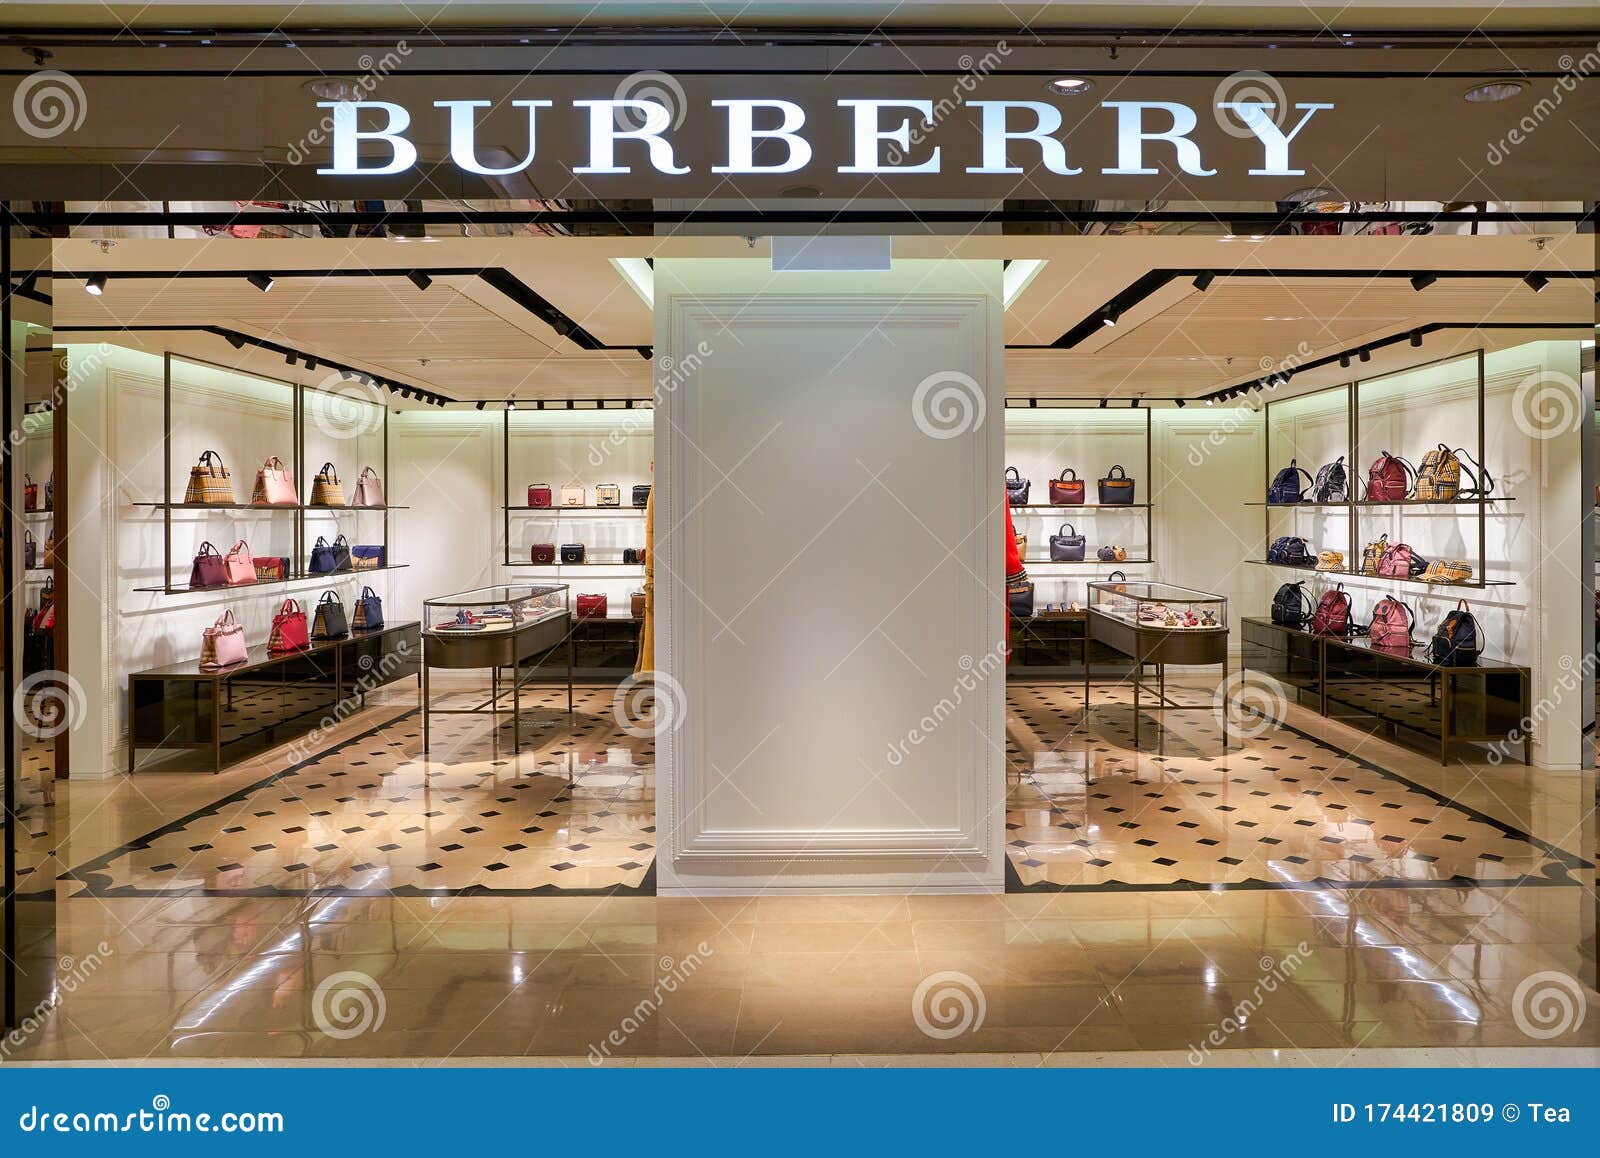 Burberry store editorial stock image. Image of mall - 174421809